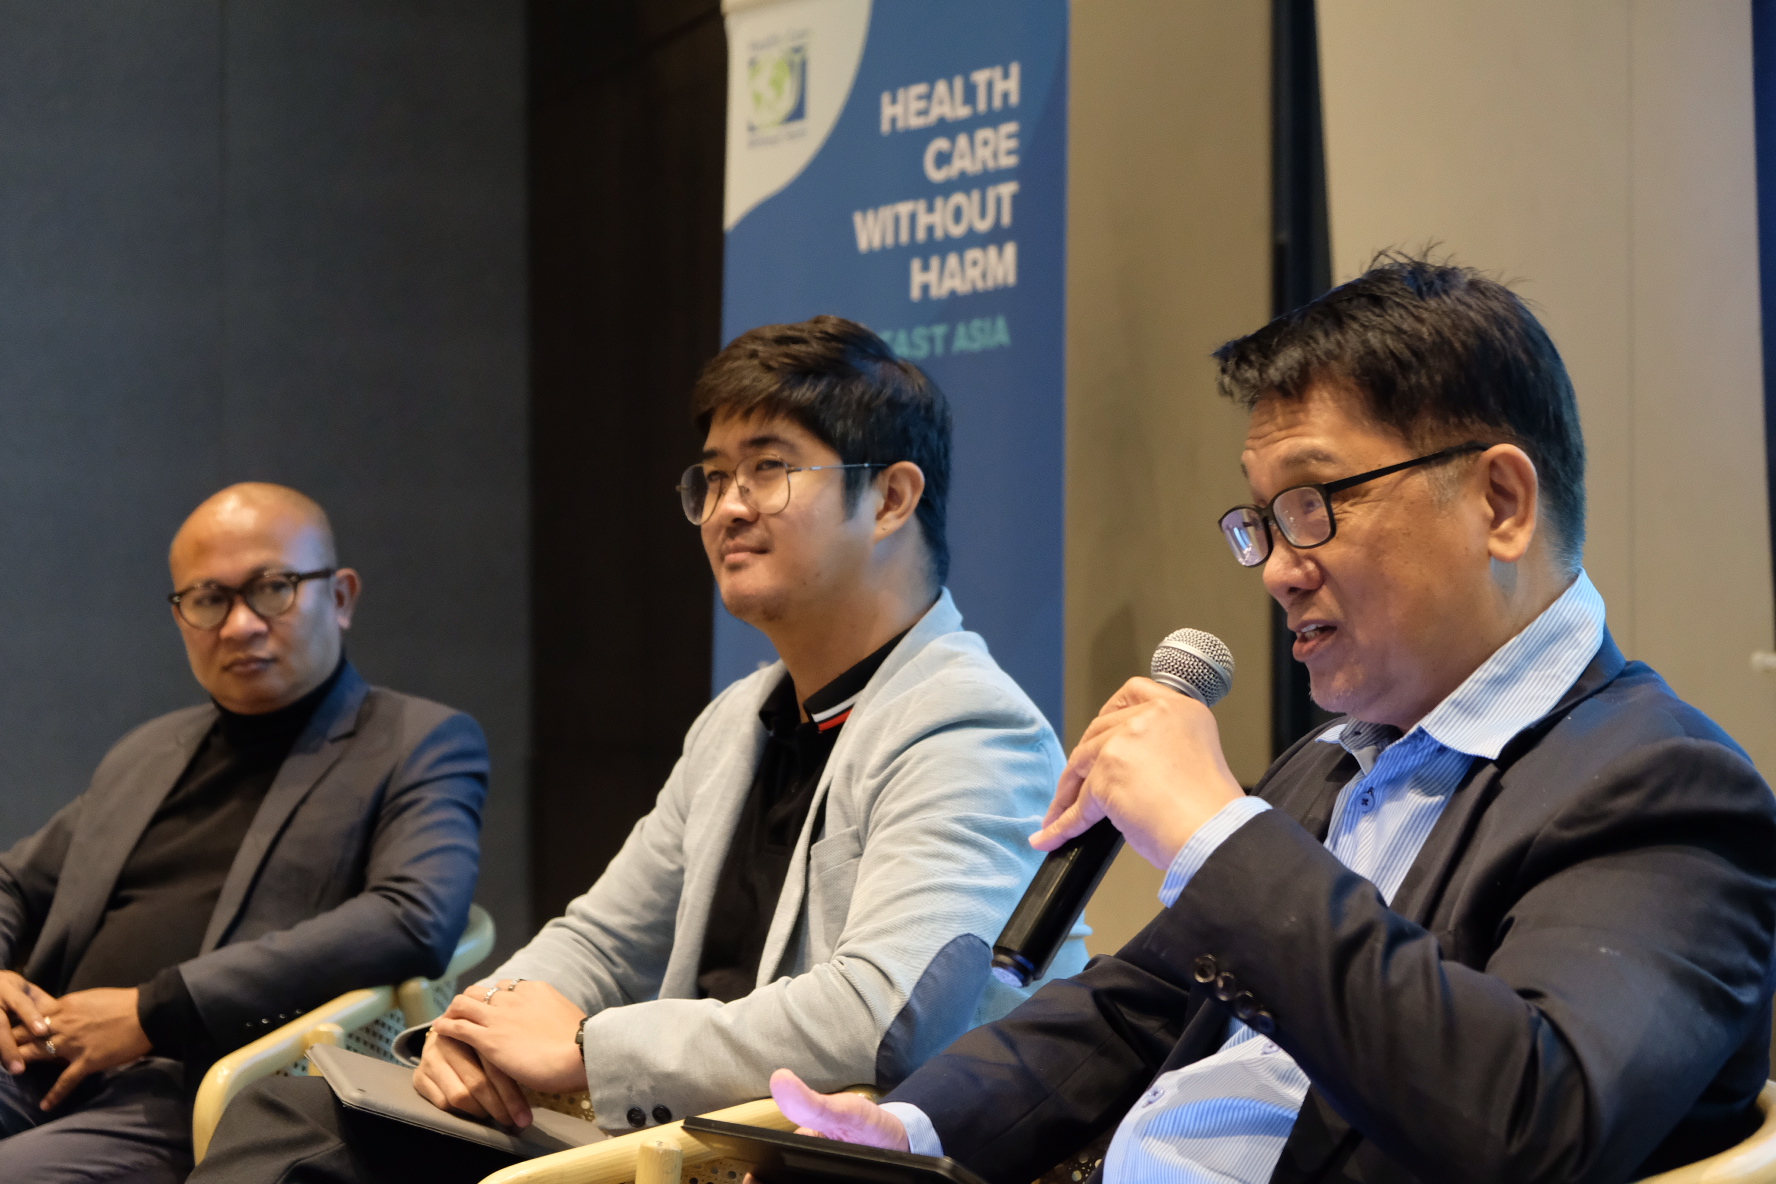 Health Care Without Harm Policy Forum on Addressing Plastic Waste Pollution in Healthcare